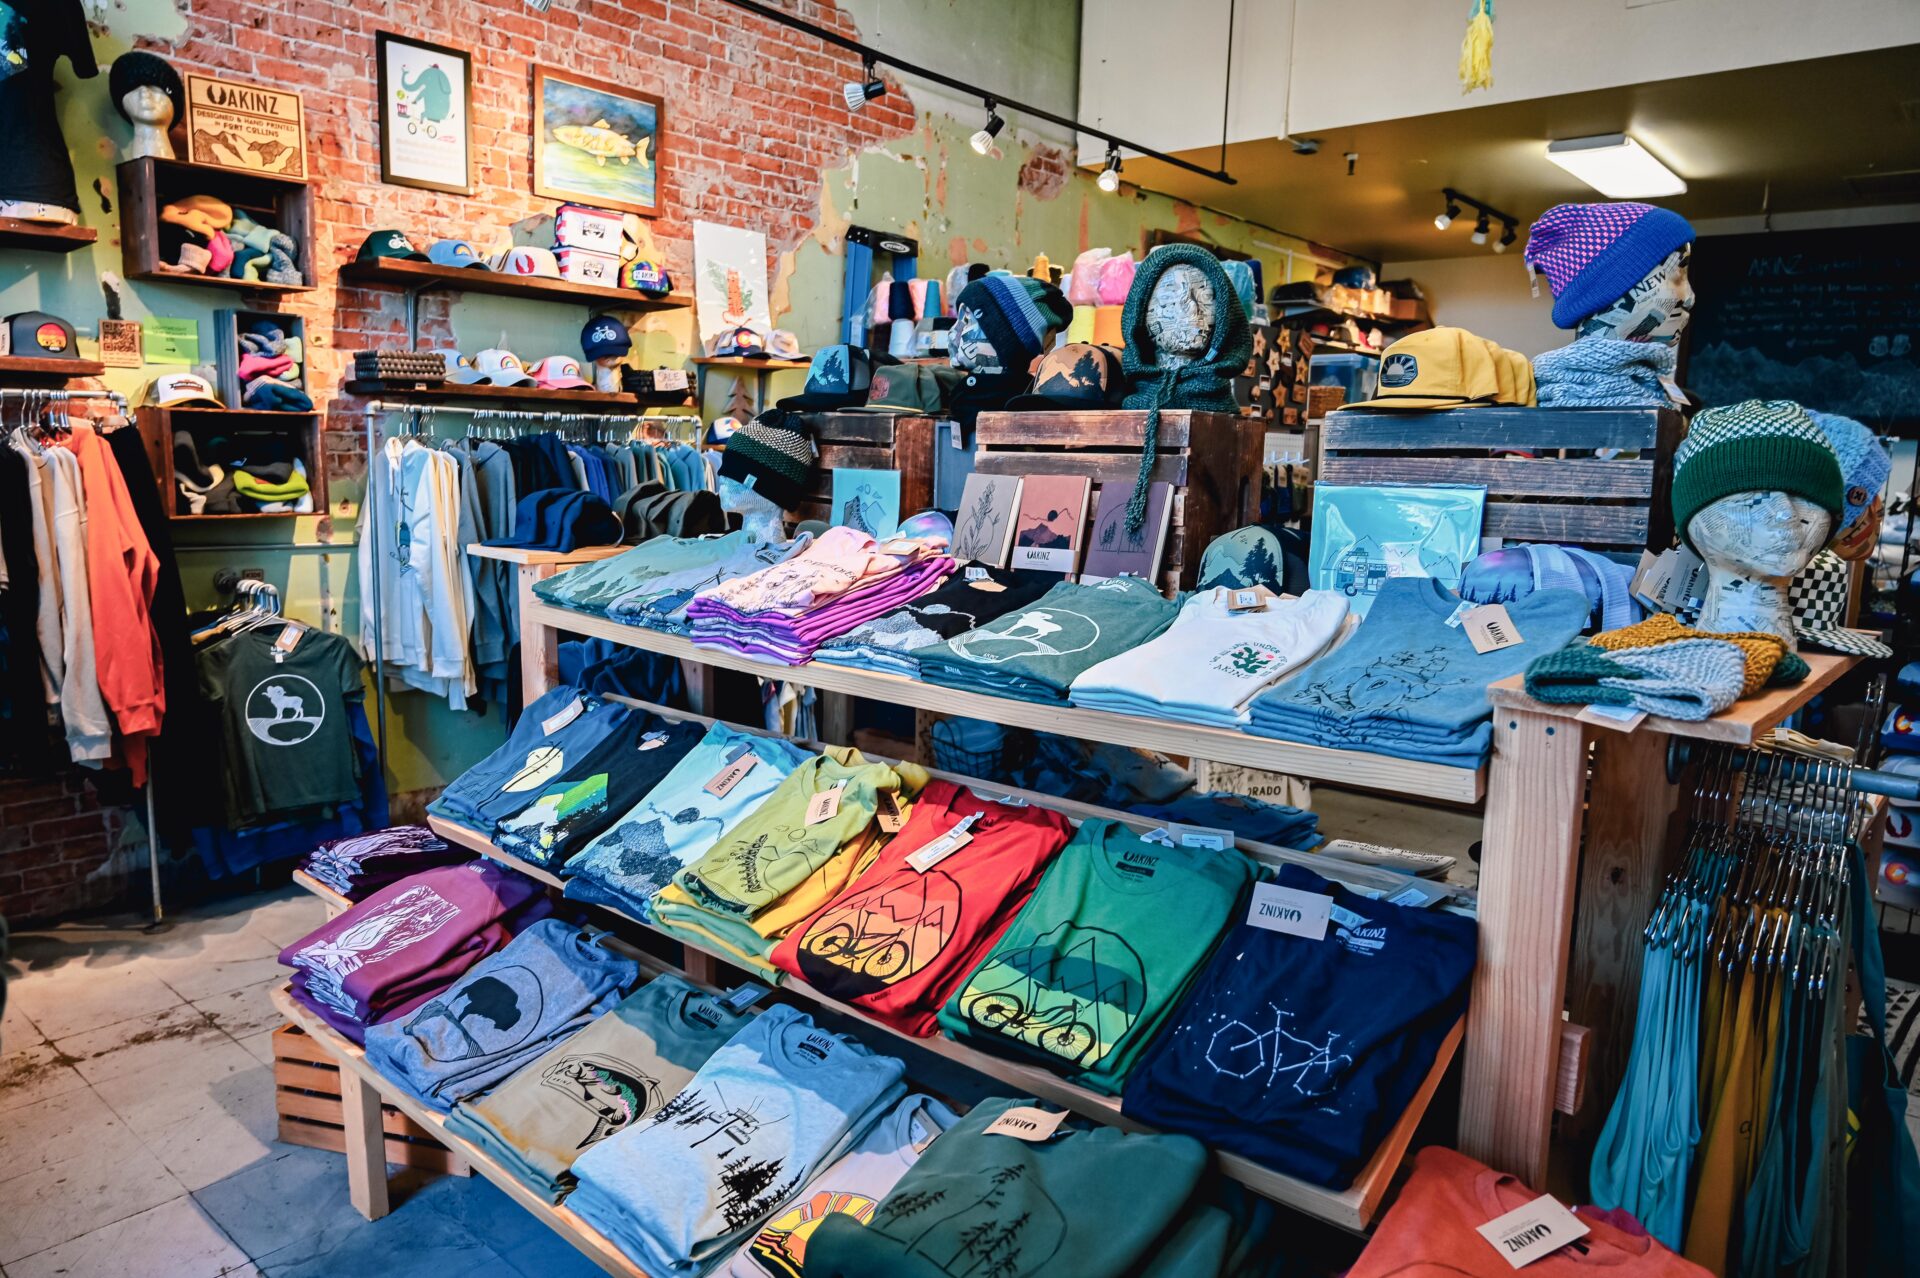 inside the Akinz store in fort collins, printed tshirts sit on a shelf display